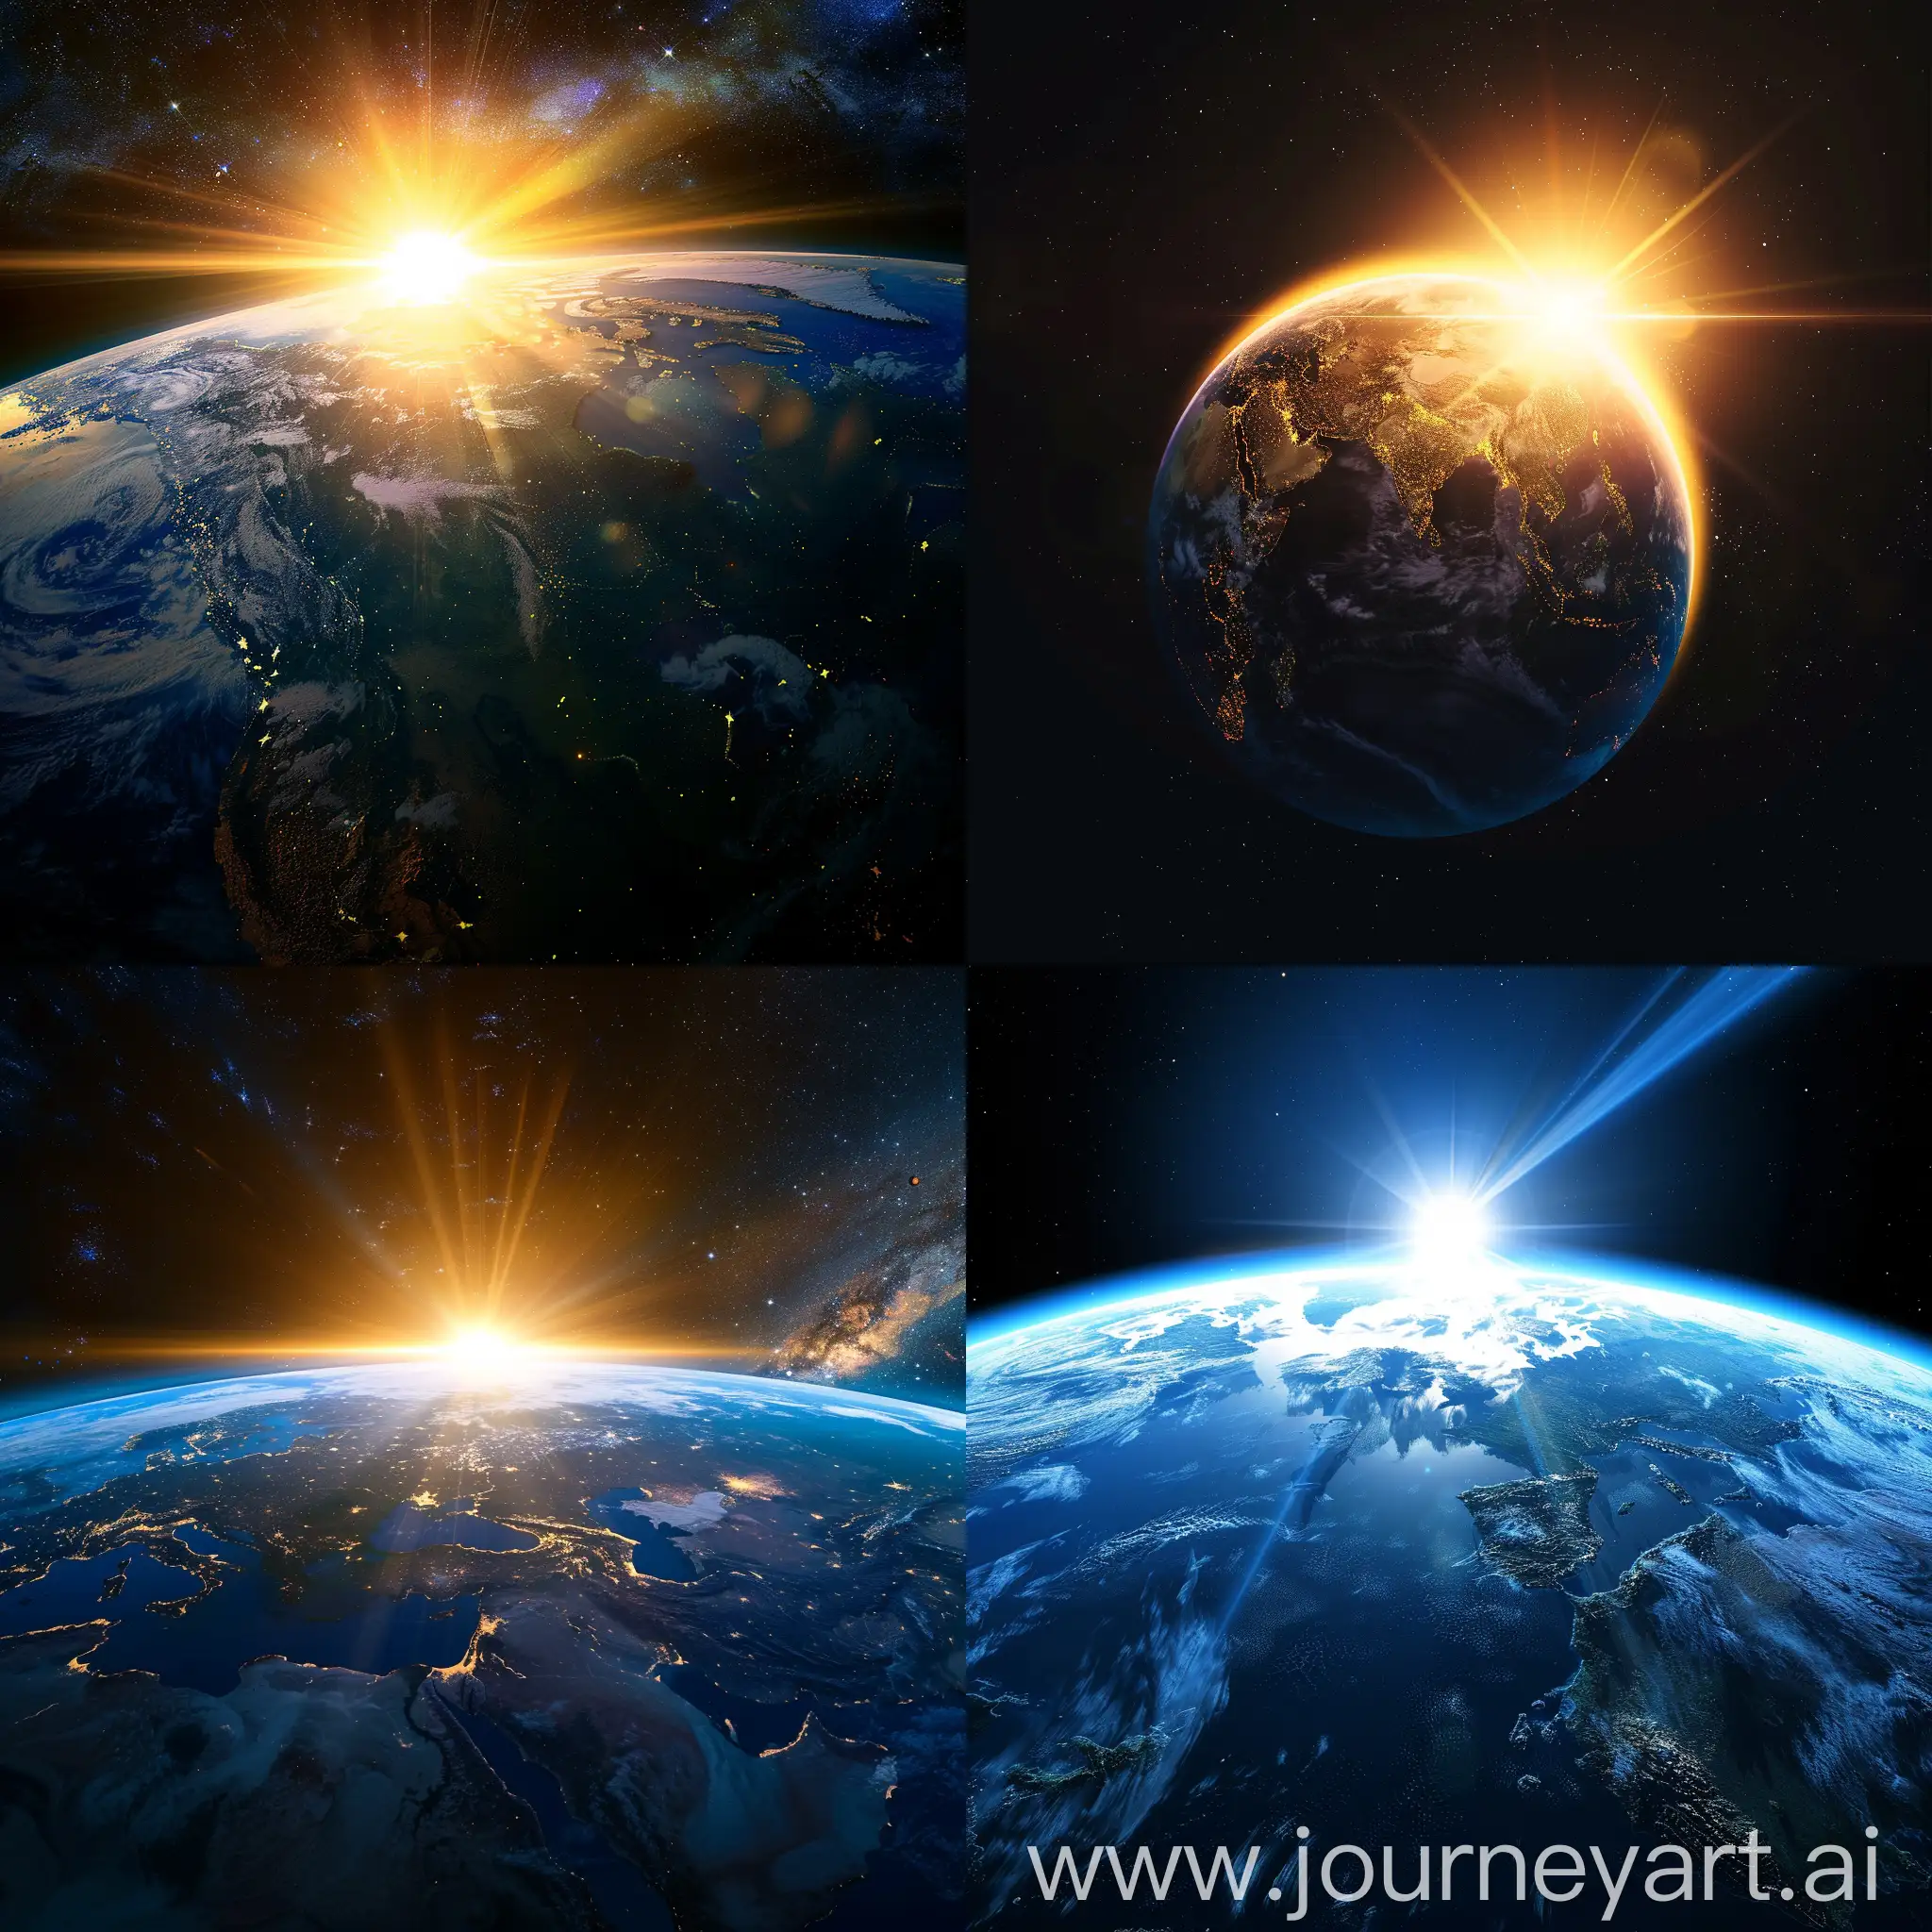 Digital sunlight to our planet
